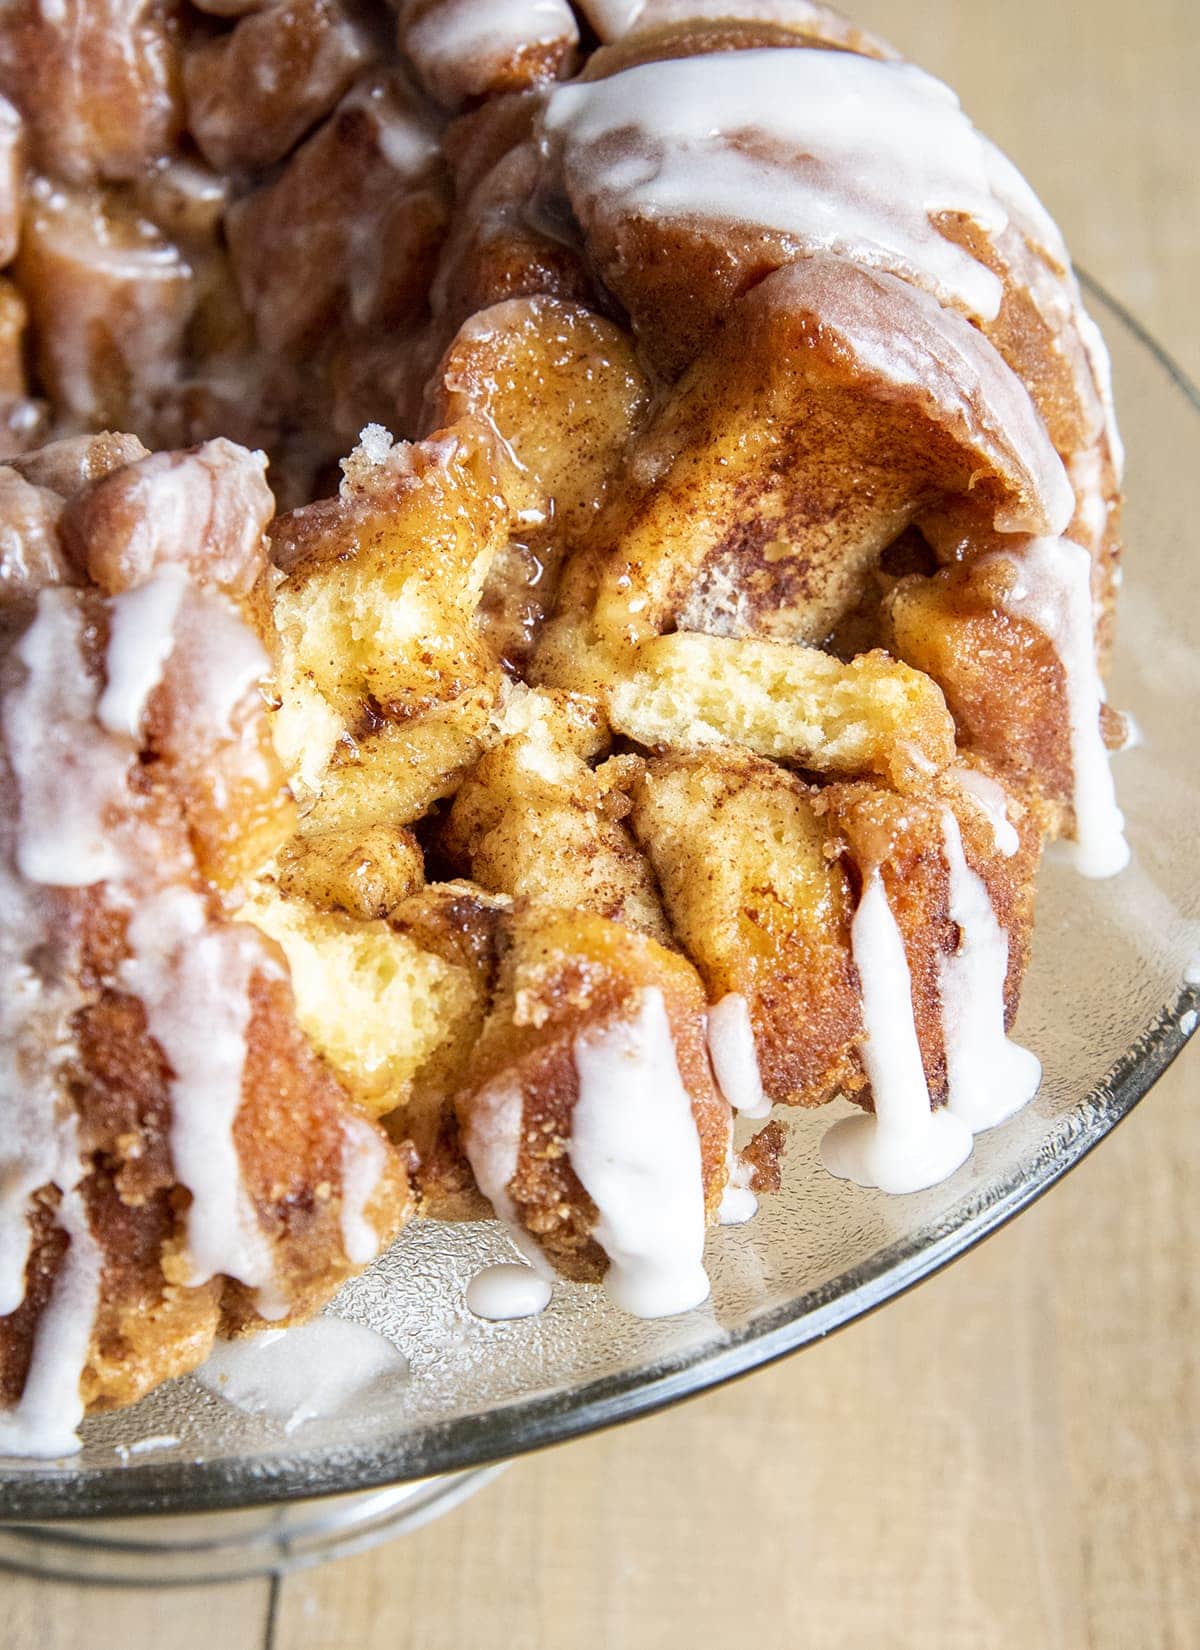 Cinnamon roll monkey bread on a glass plate with a few pieces taken out showing the inside of the bread.